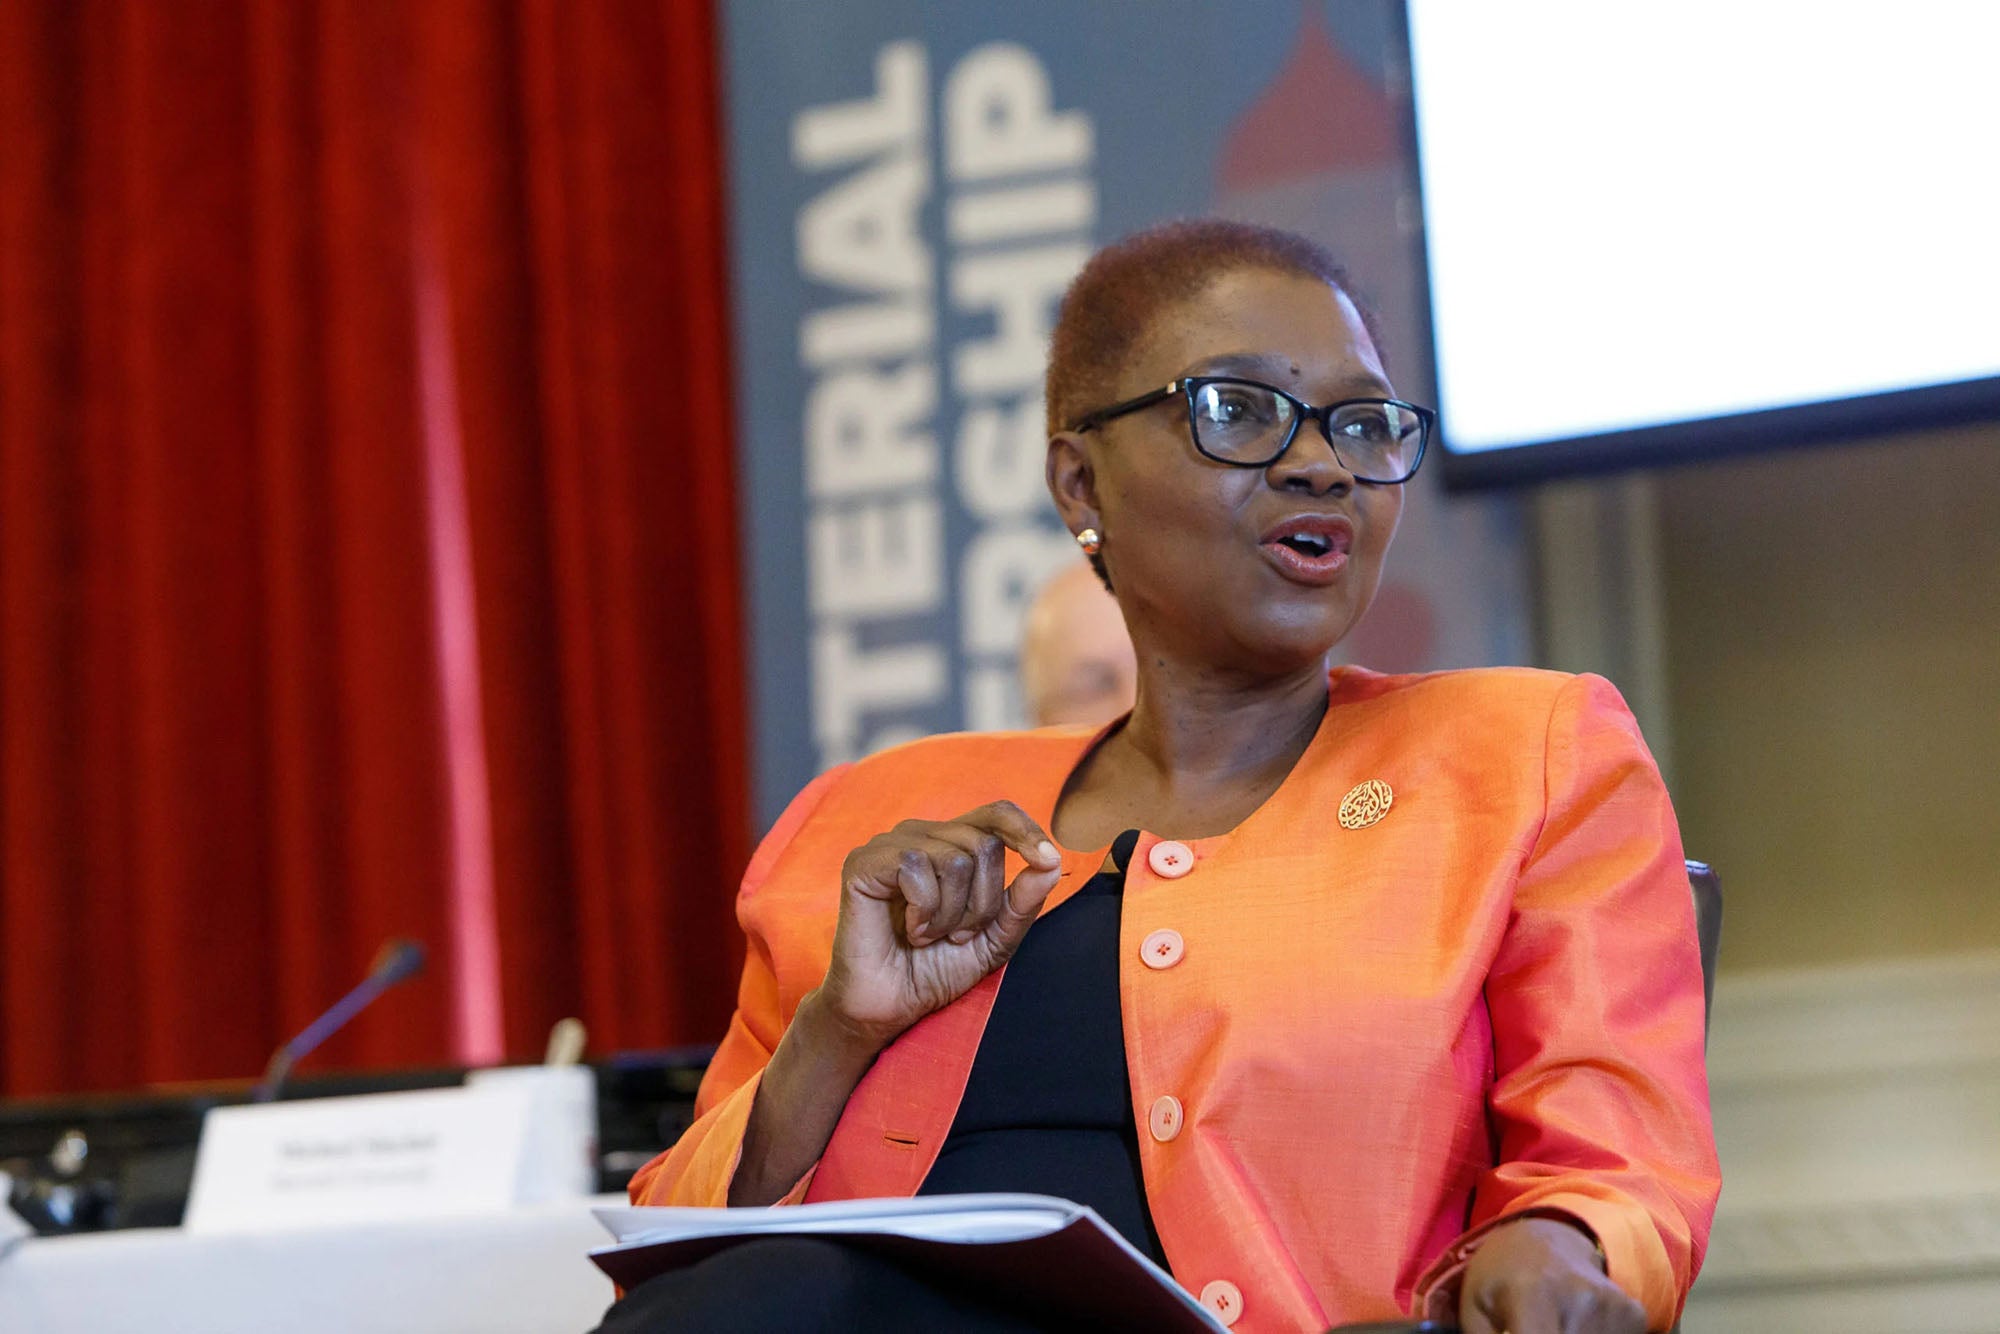 Harvard Ministerial Leadership Program Advisory Board Member Baroness Valerie Amos, who is the Master of University College, Oxford University and former Secretary of State for International Development of the United Kingdom, provides keynote remarks during the 2019 Harvard Ministerial Forum for Sectoral Ministers.